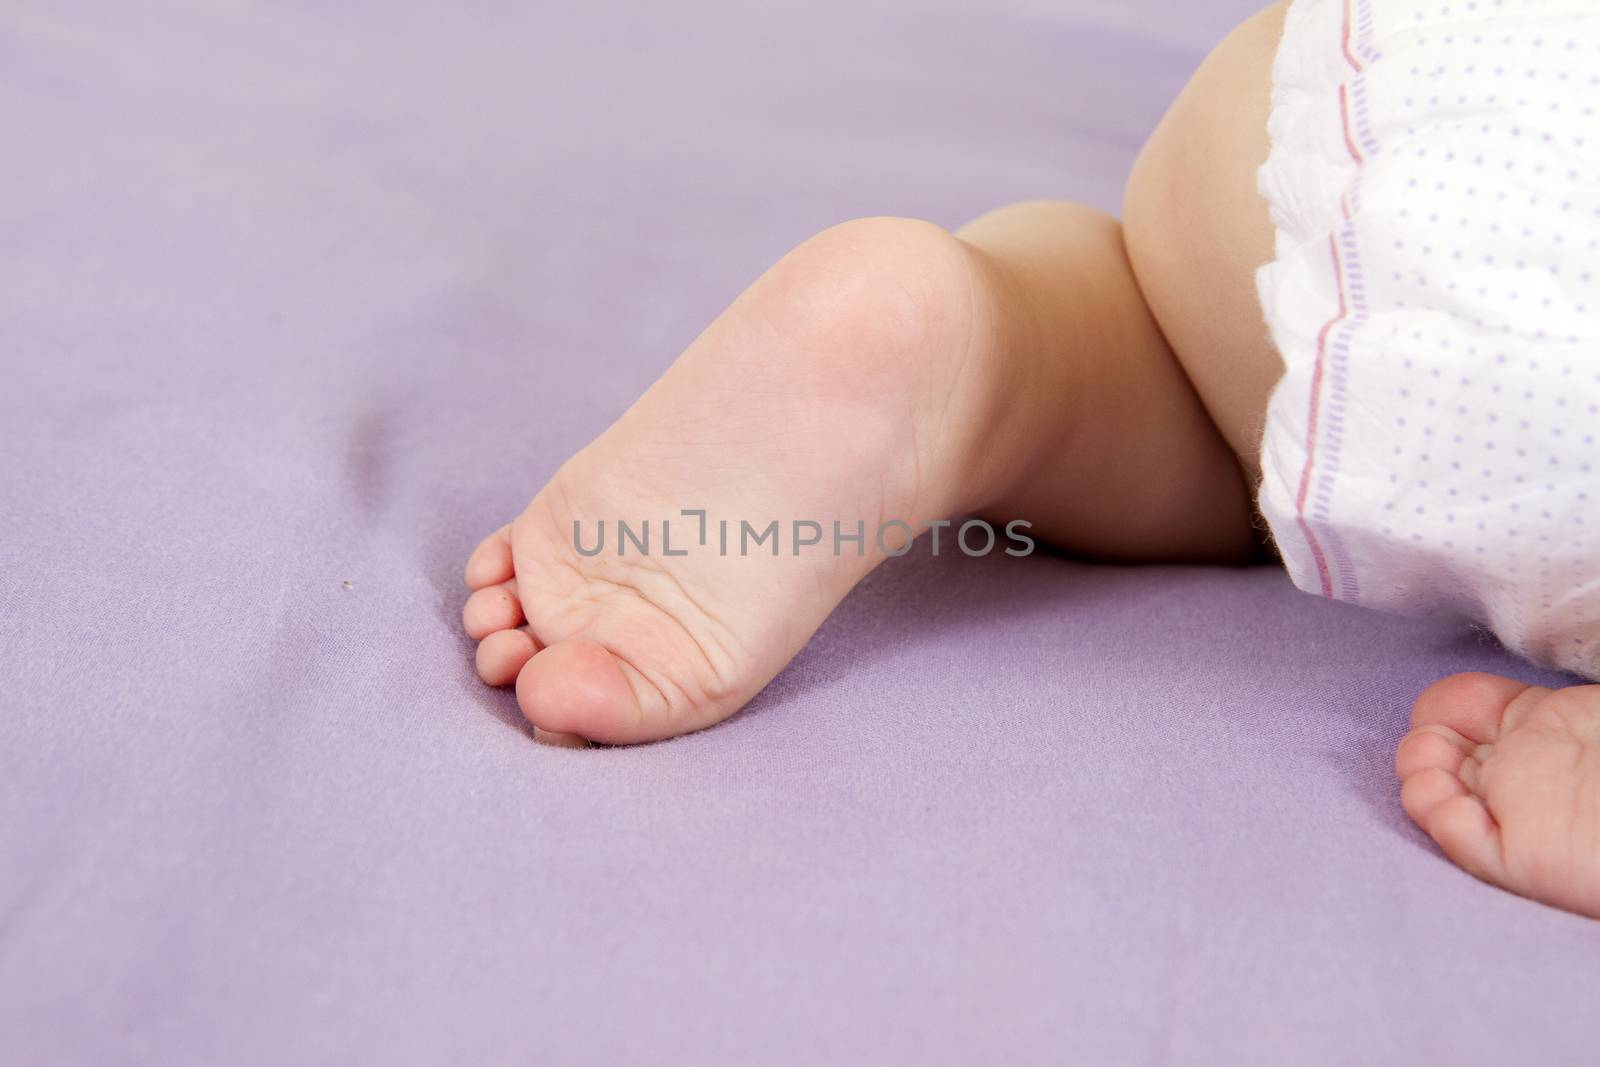 Small size of baby feet, with delicate little fingers by Irina1977